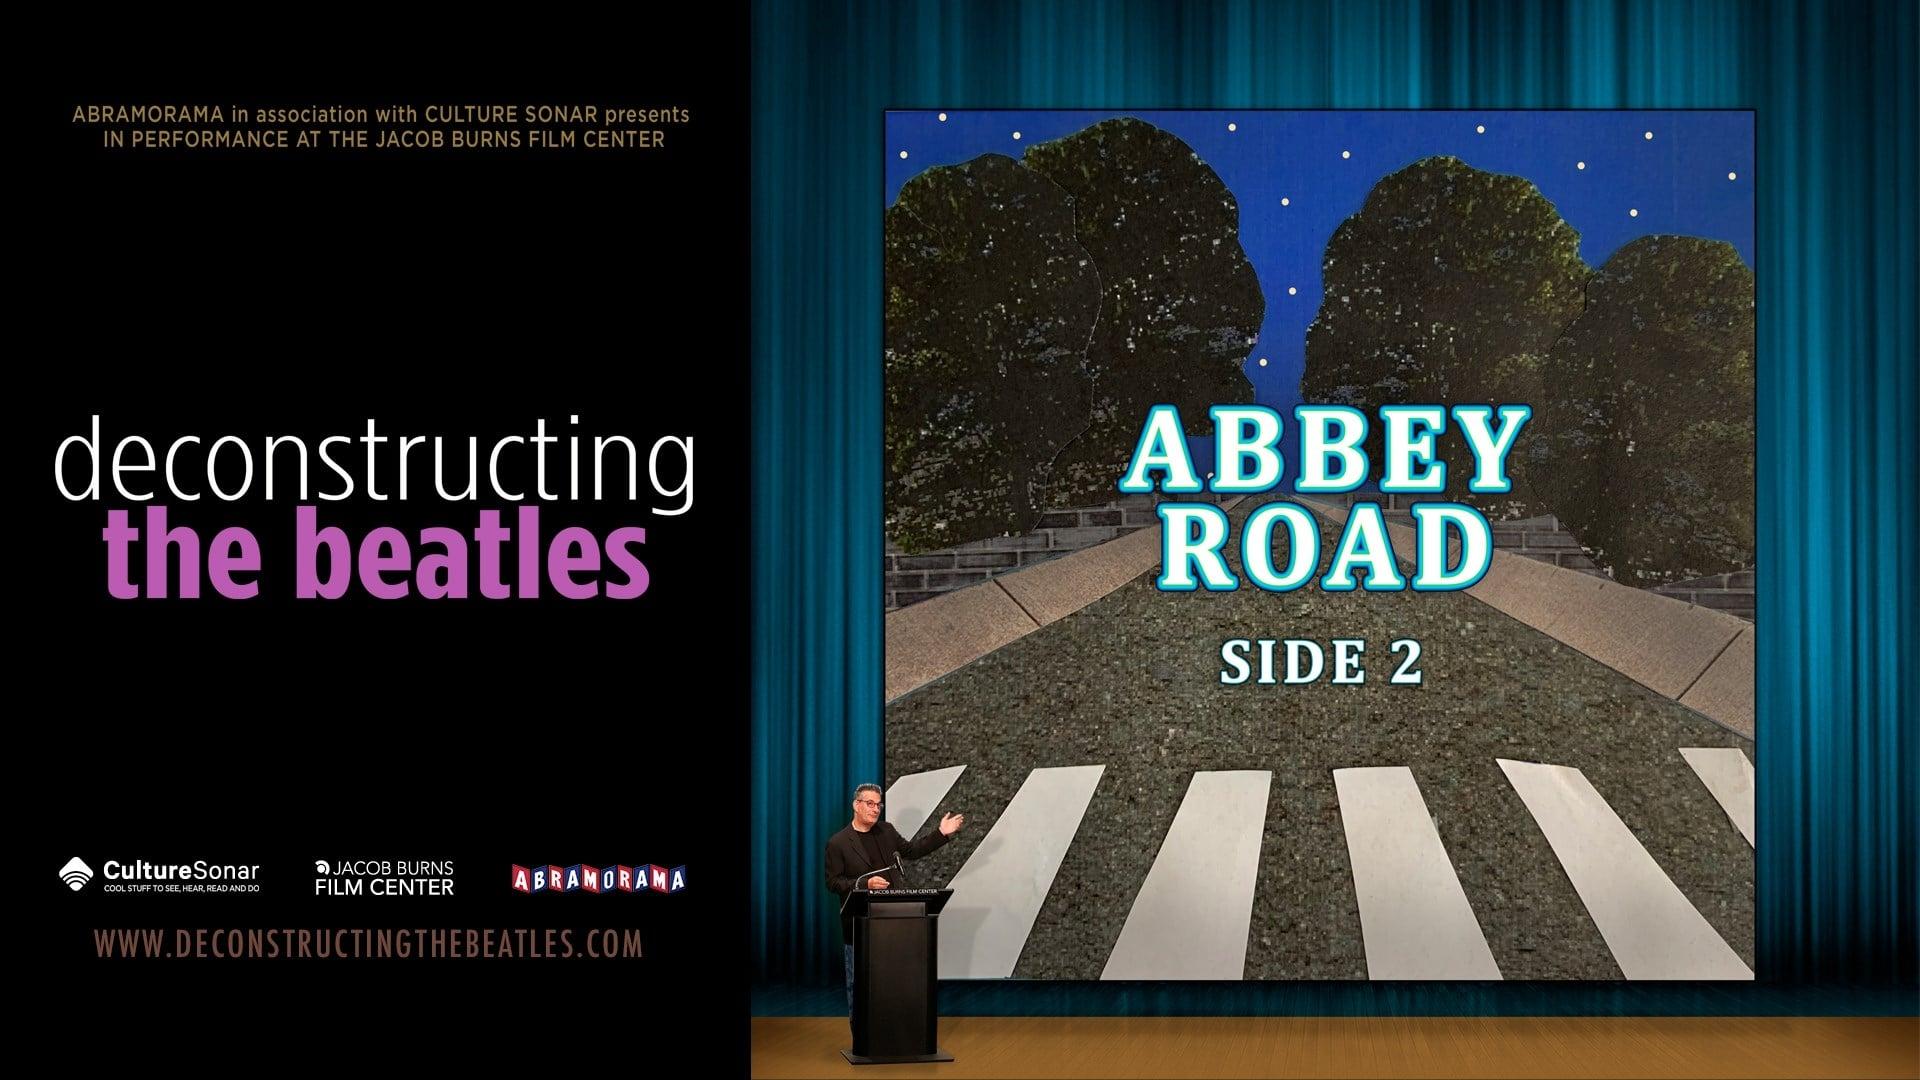 Deconstructing the Beatles' Abbey Road: Side 2 backdrop